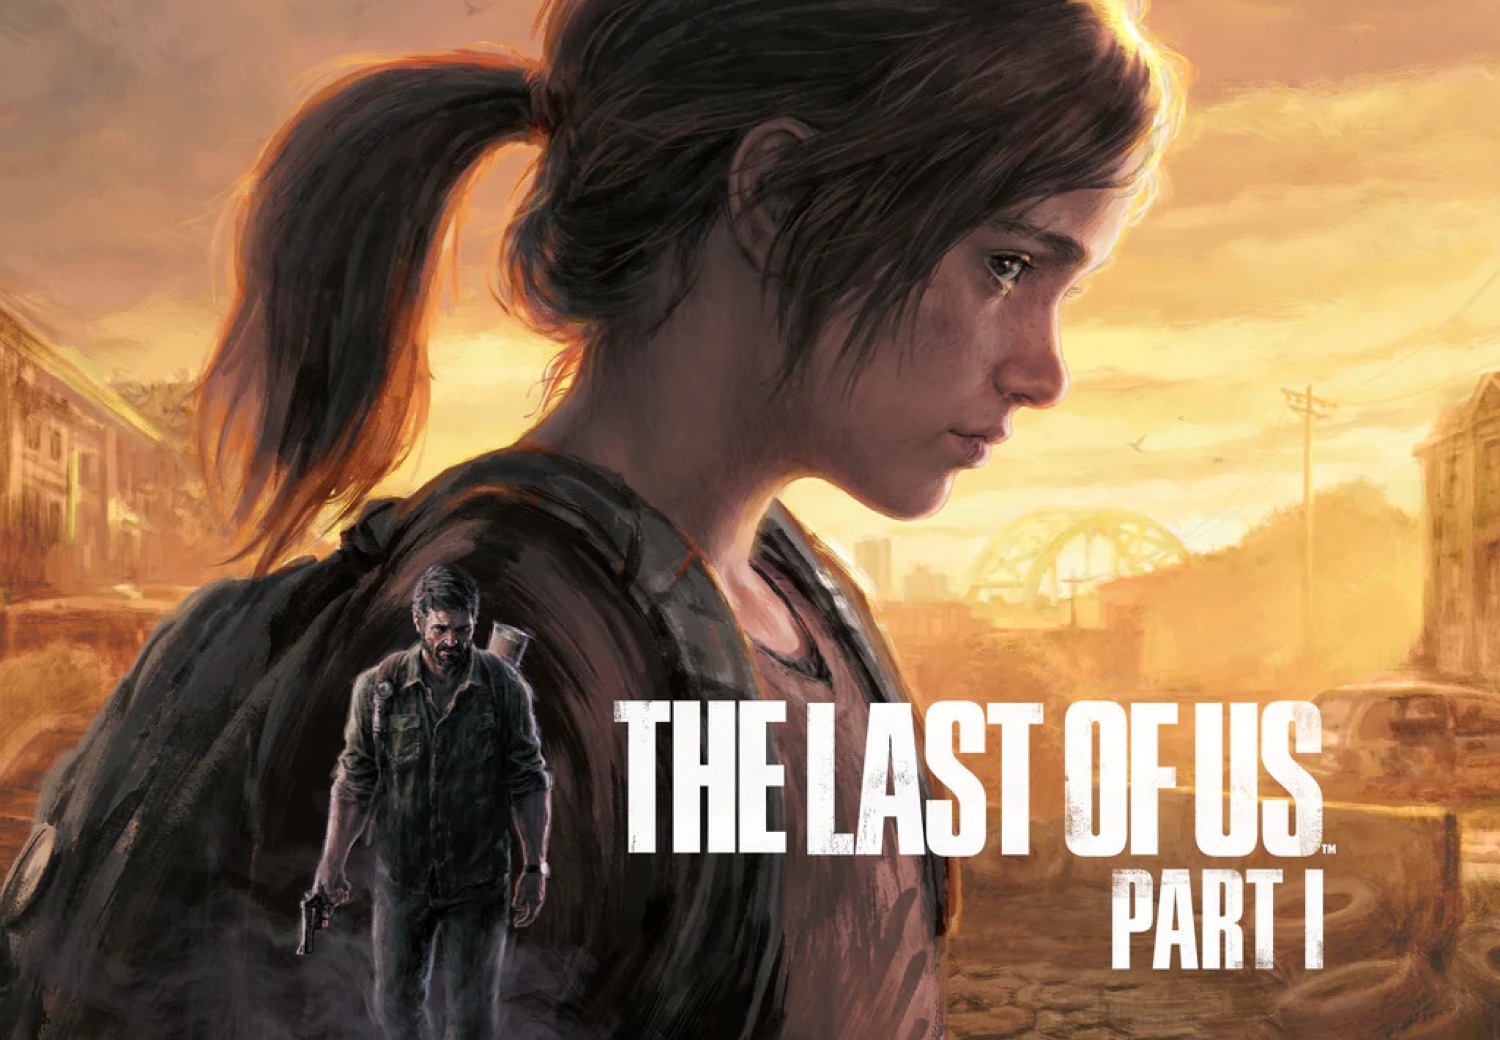 Pre Order: The Last of Us Part 1 Steam Key $48 (Digital Delivery)